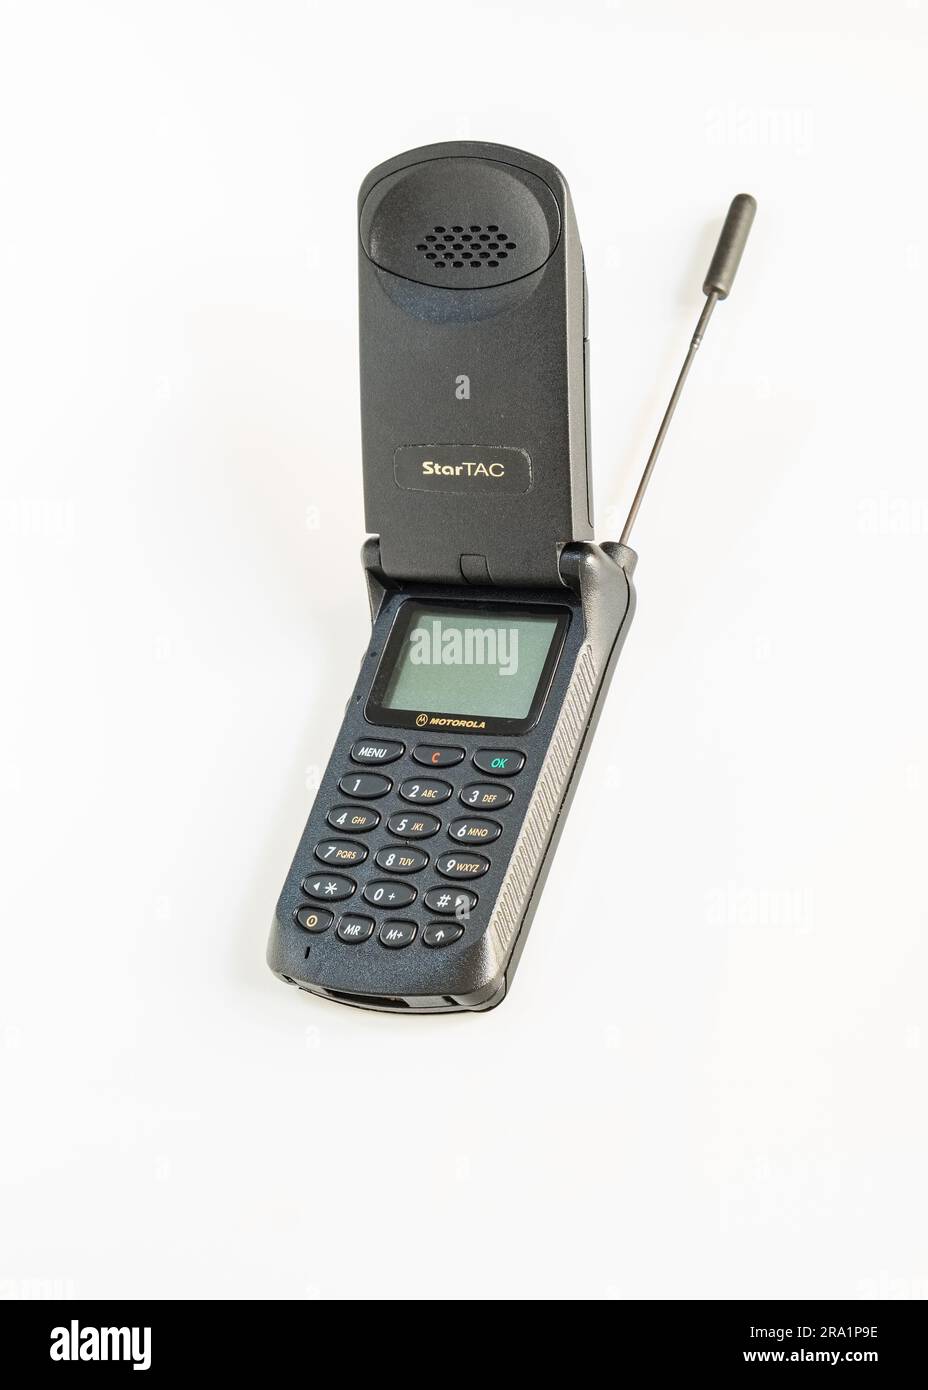 Motorola Startac, open cell phone from the 90s with the antenna removed, a technological icon that has made the history of mobile telephony. Stock Photo